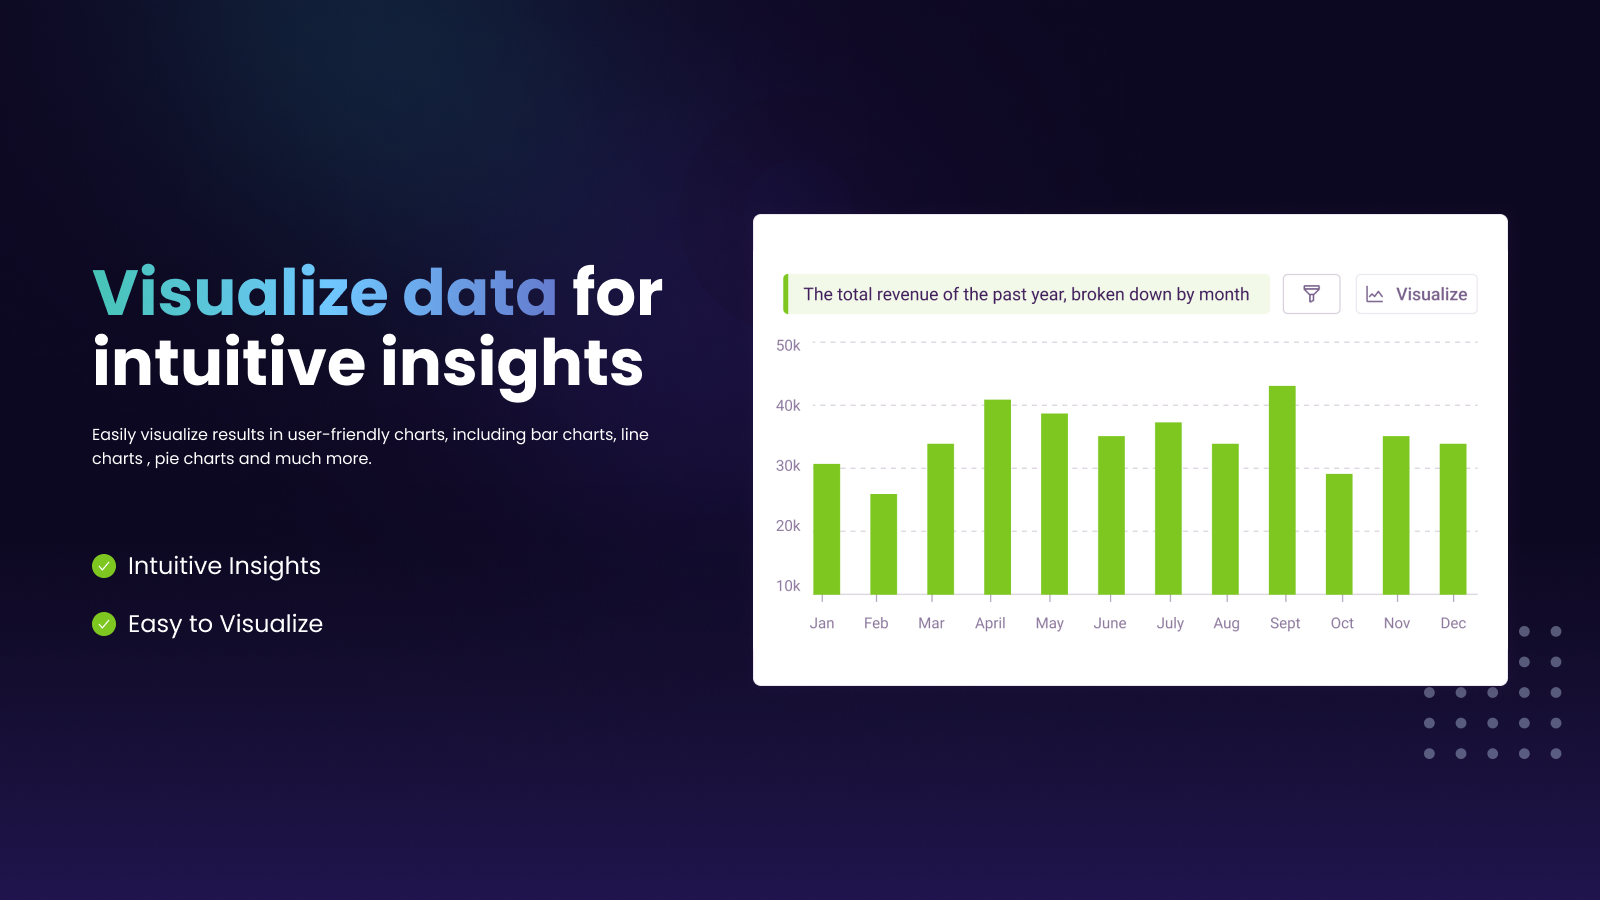 Visualize data for intuitive insights